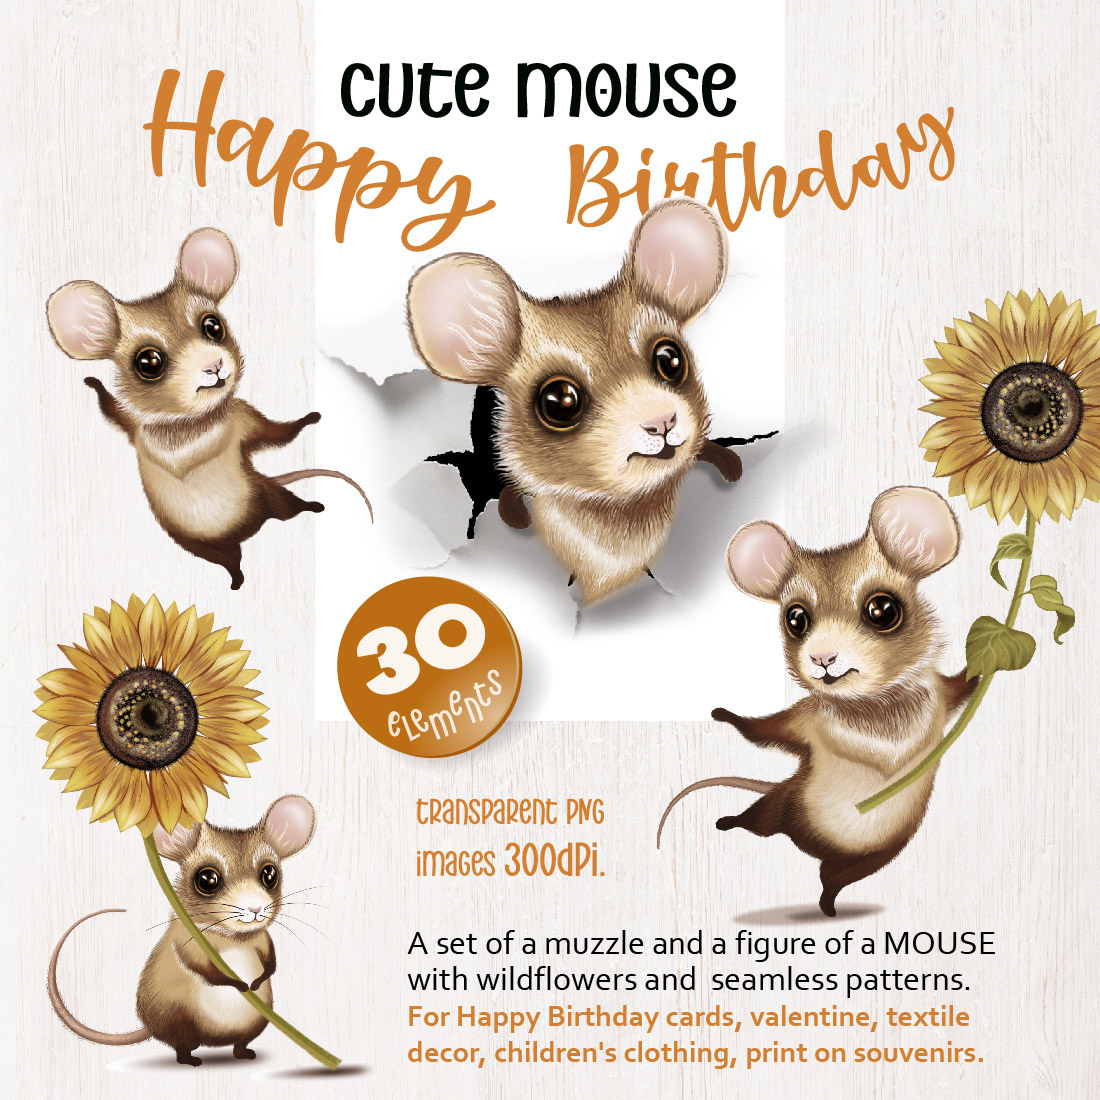 Cute Cartoon Little Mouse with Flowers previews.